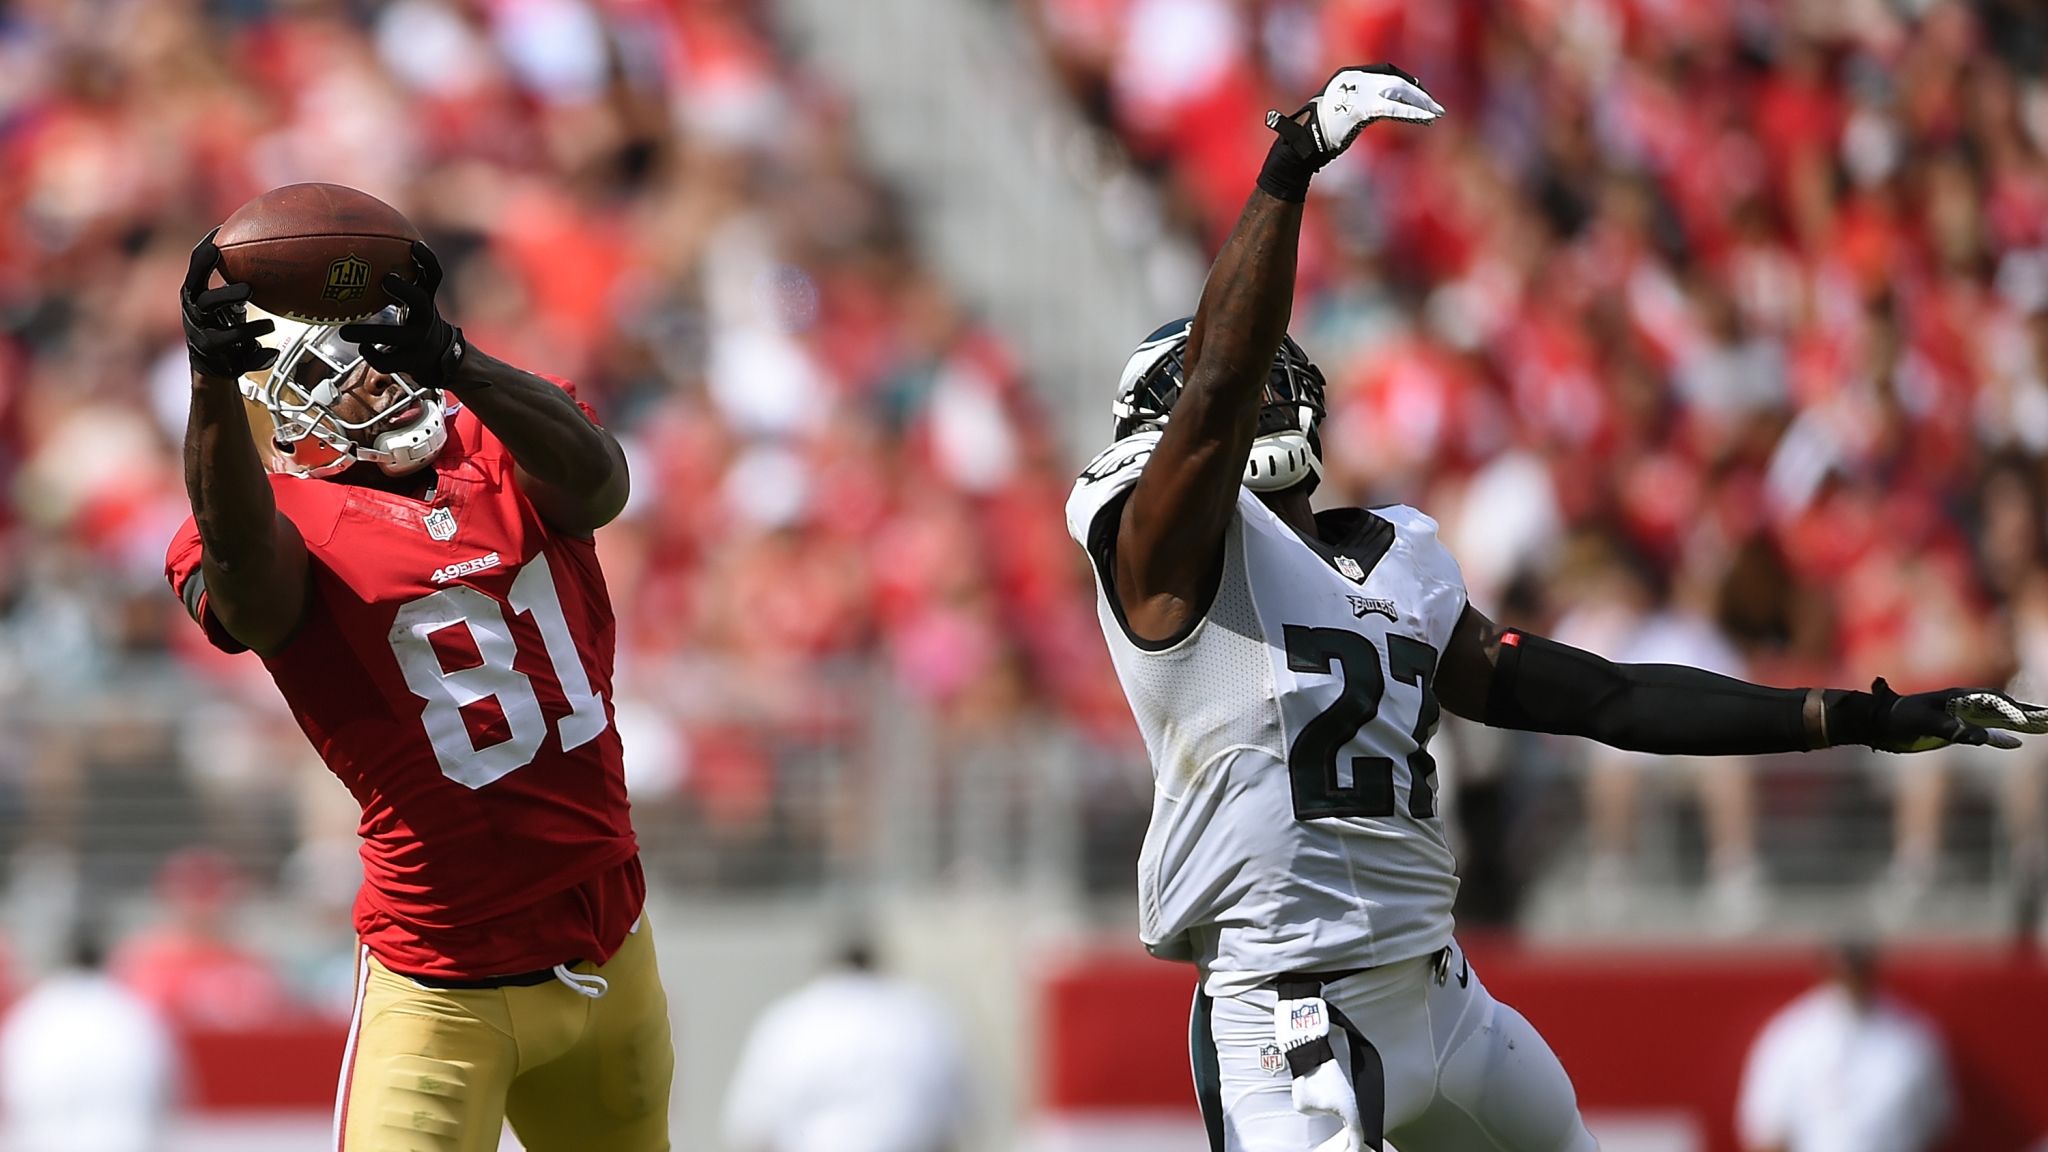 NFL: San Francisco 49ers hand first defeat of season to